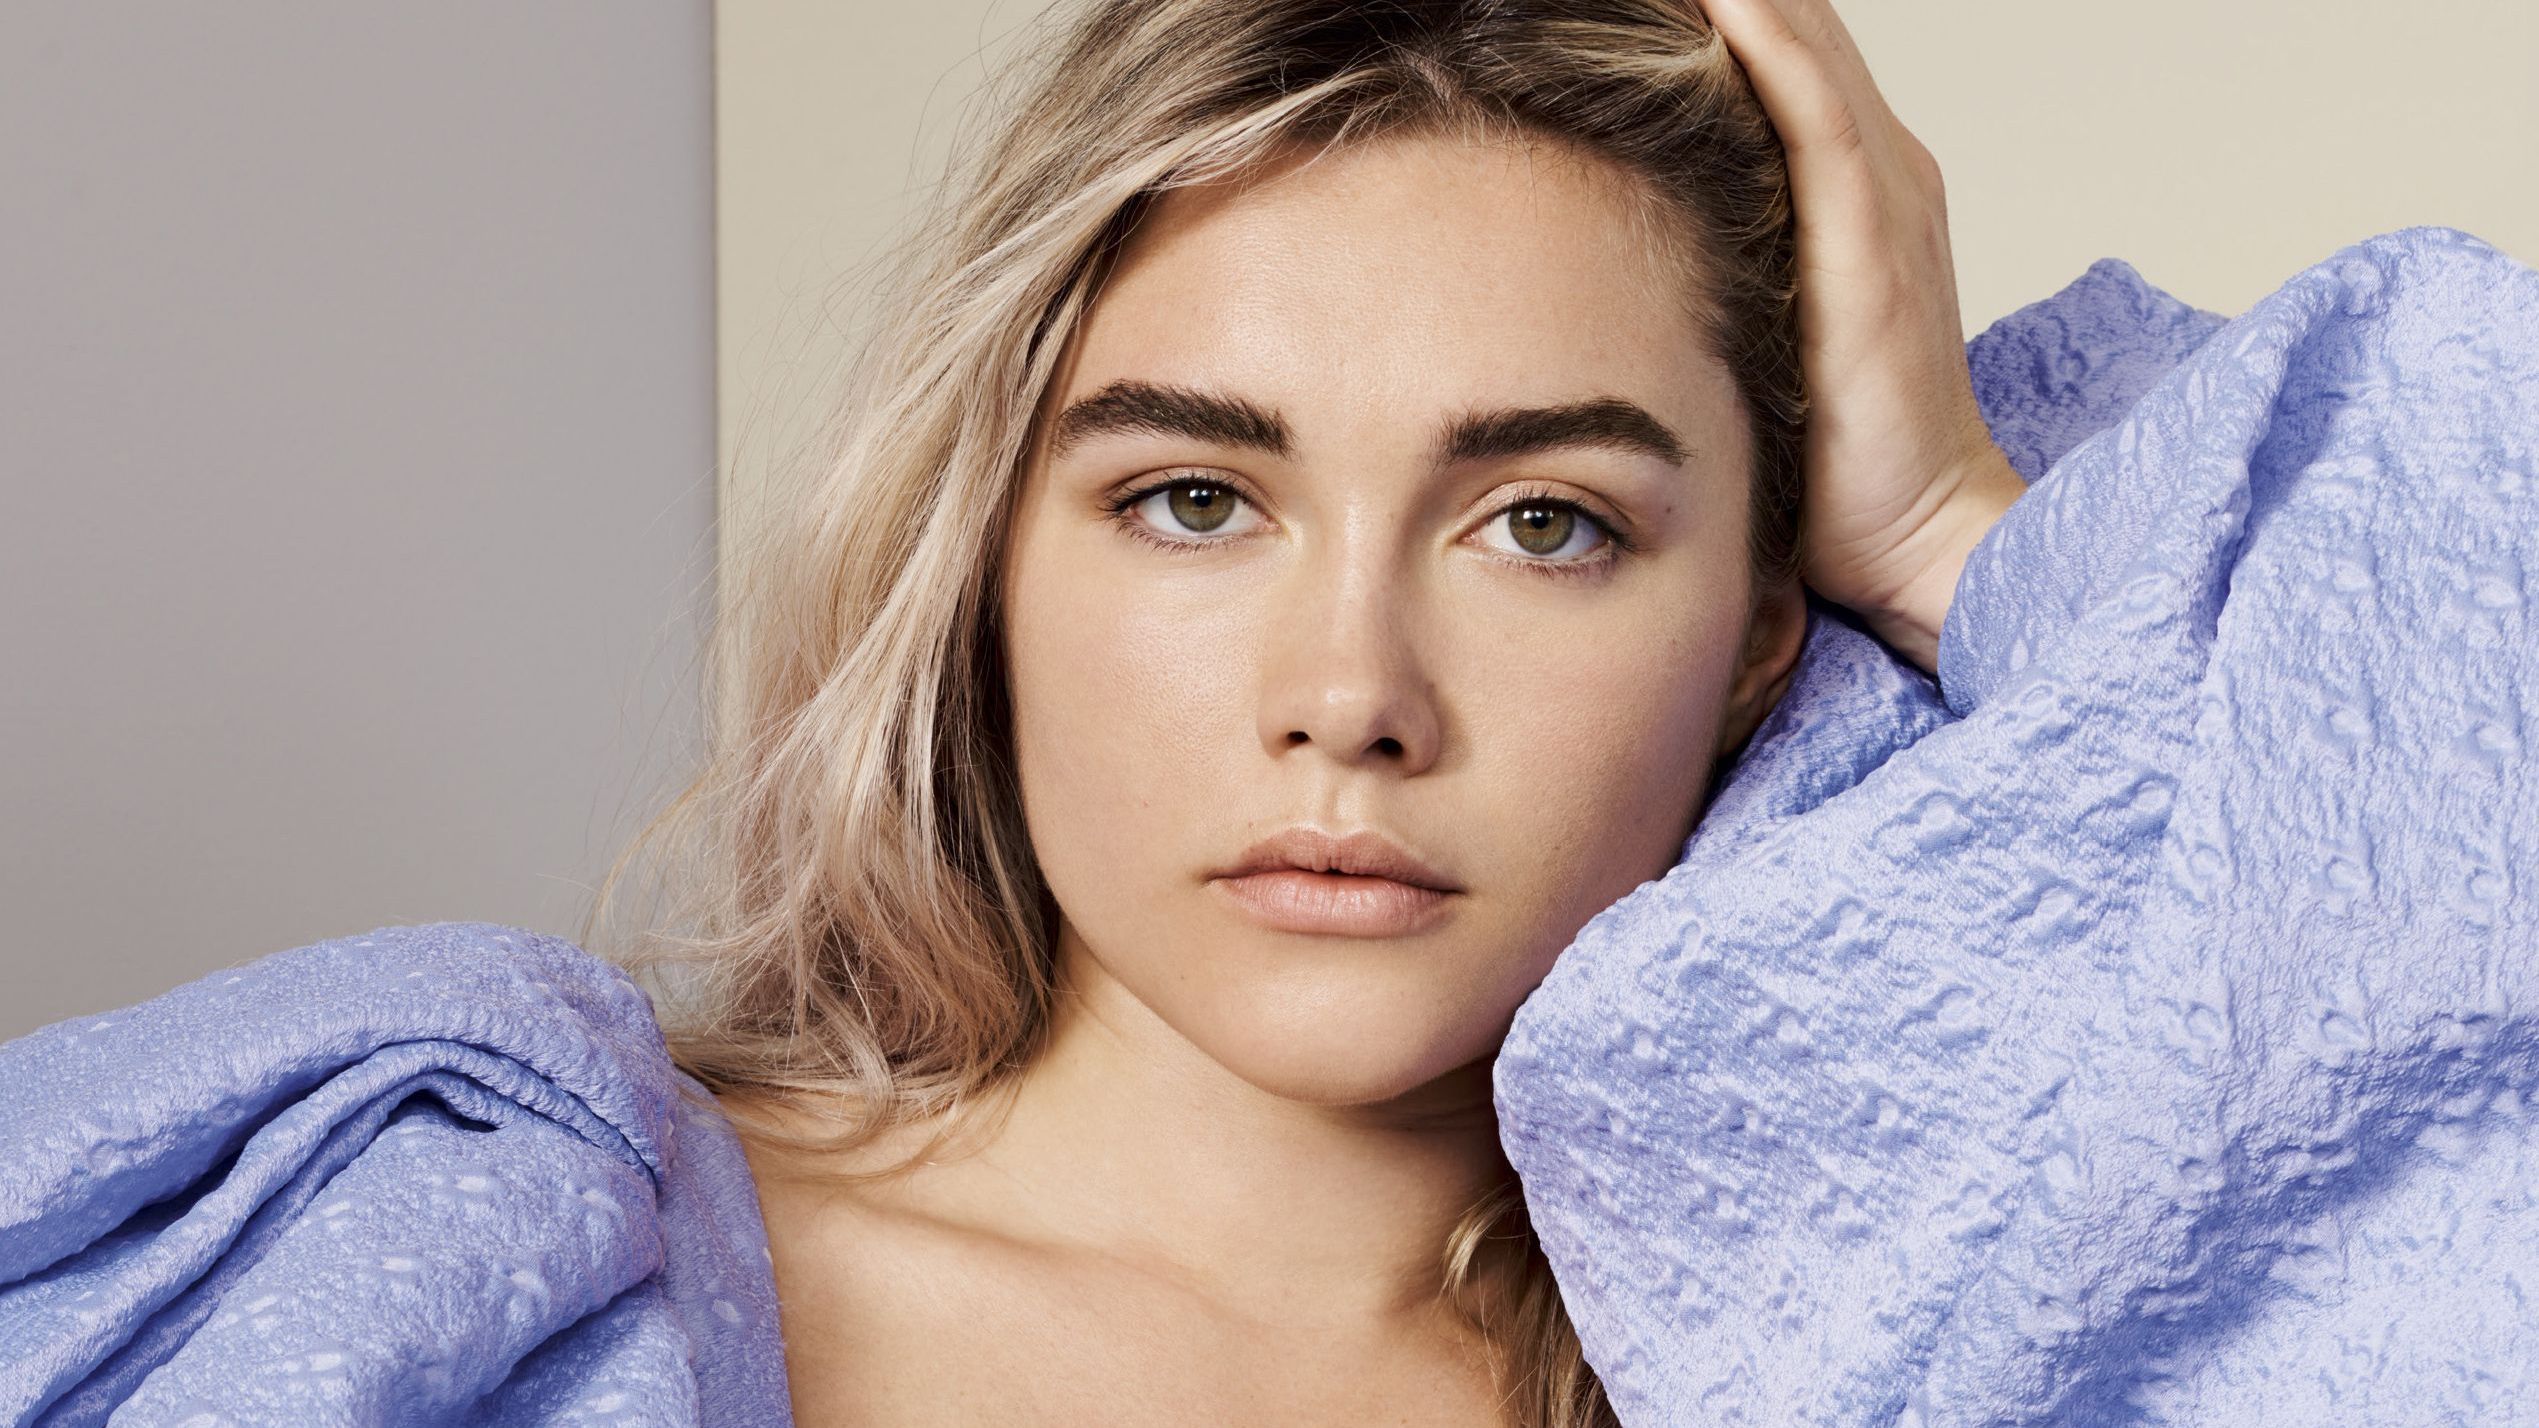 A woman with blonde hair and blue eyes wearing a blue shirt. - Florence Pugh